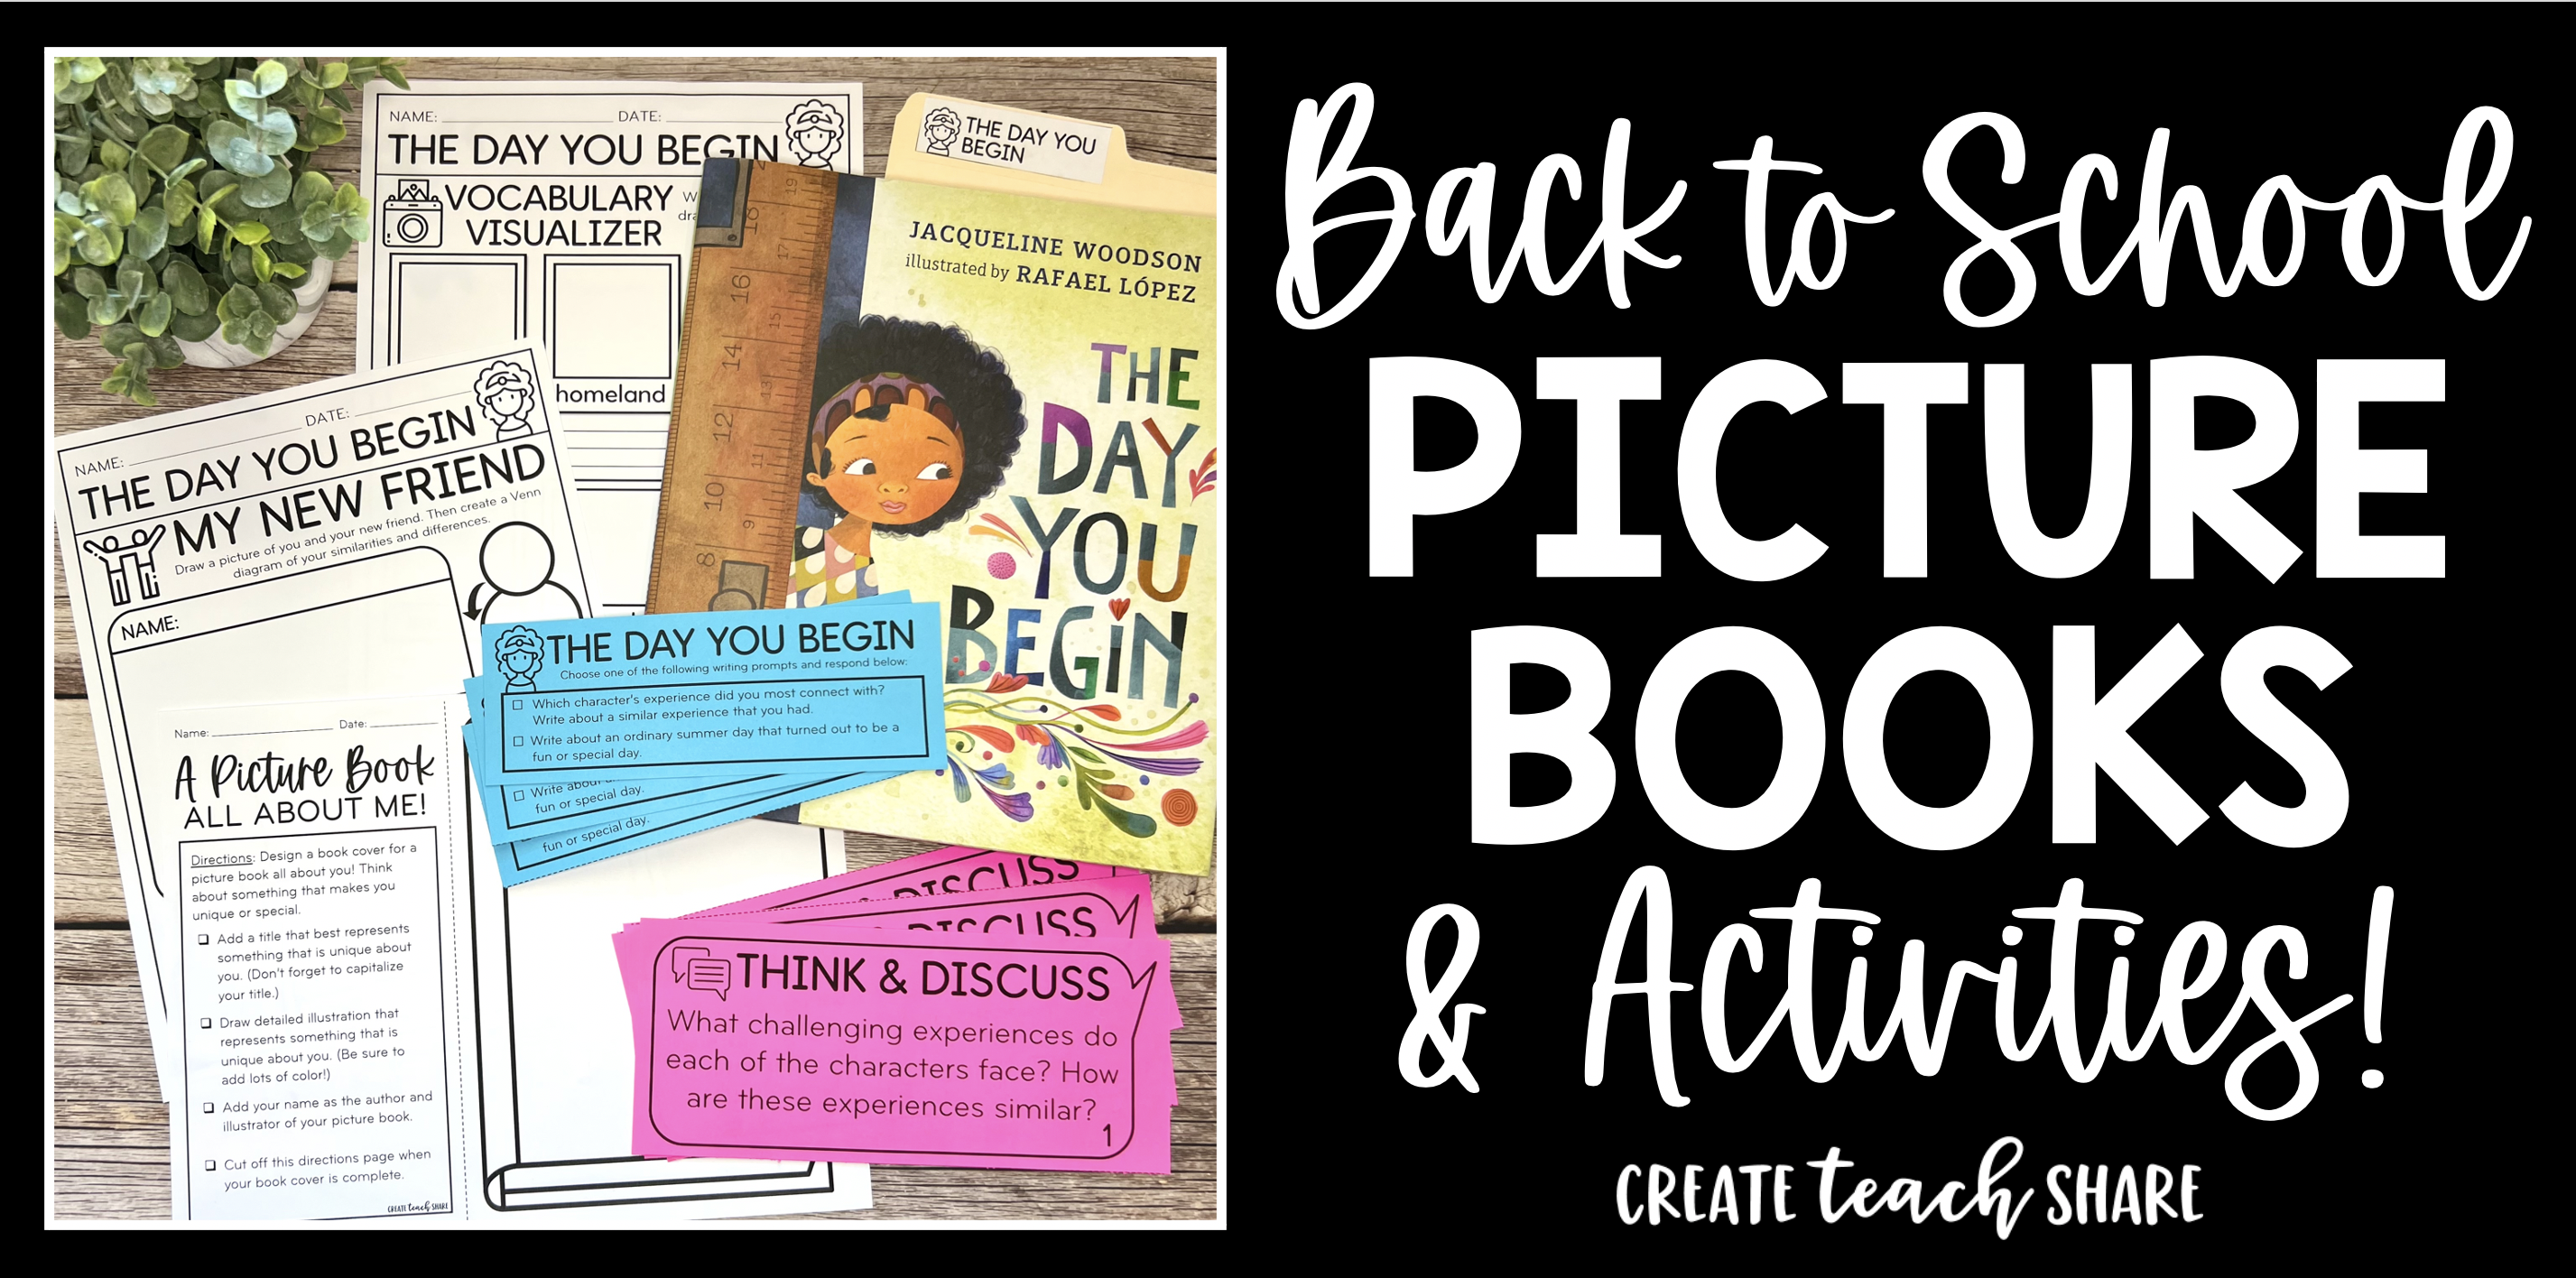 Featured Image. Picture of the book The Day You Begin, plus activities to go with the book. Title: Back to School Picture Books & Activities